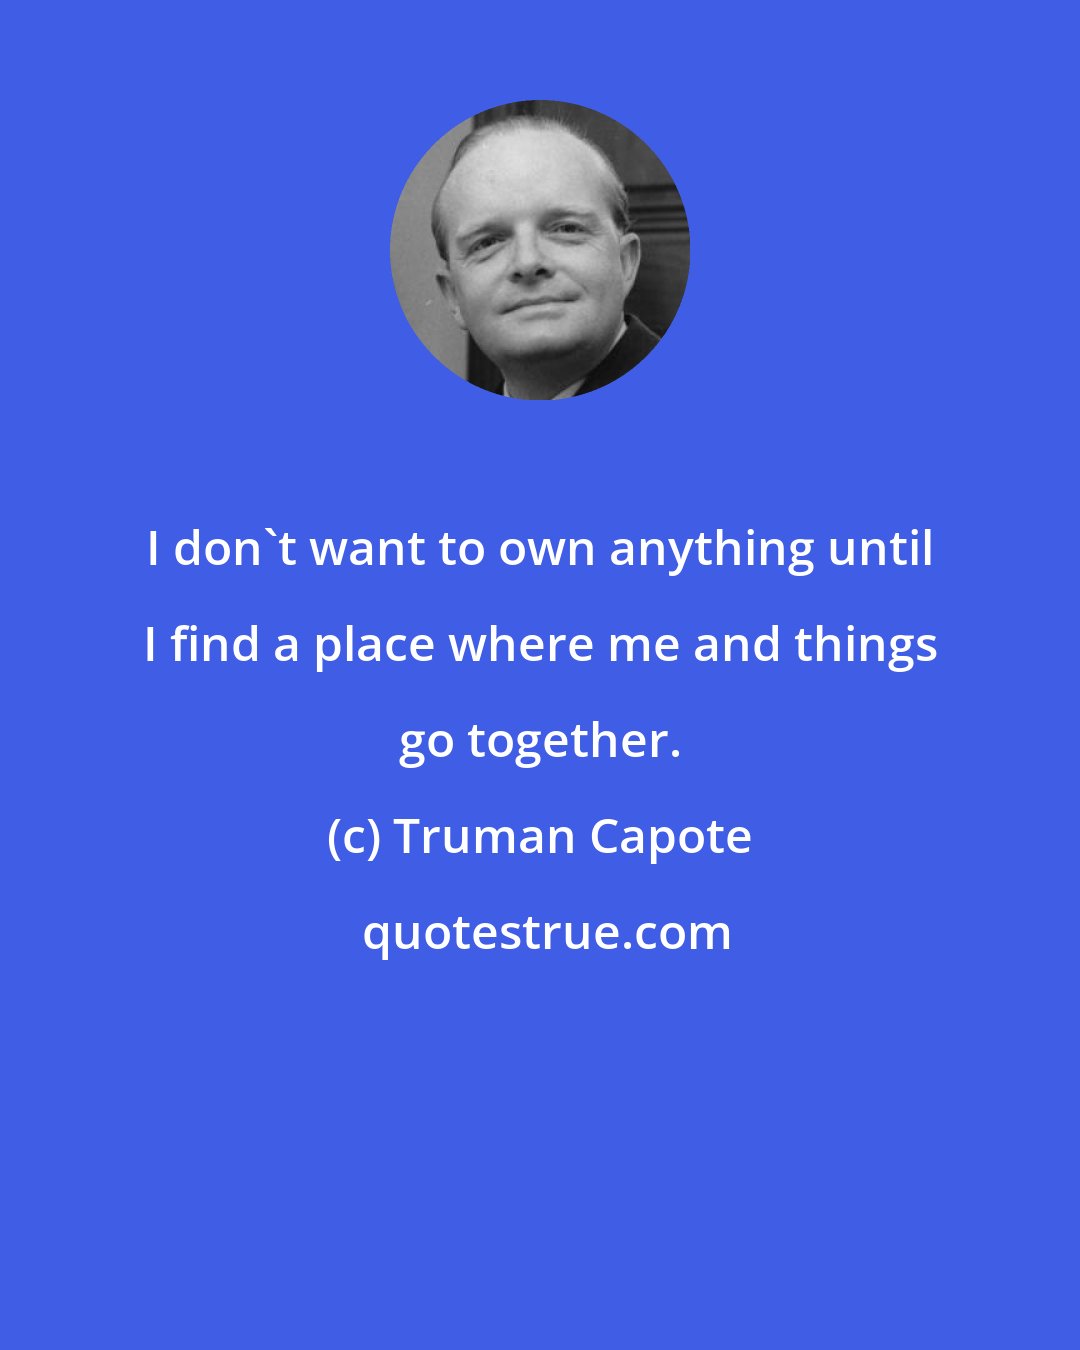 Truman Capote: I don't want to own anything until I find a place where me and things go together.